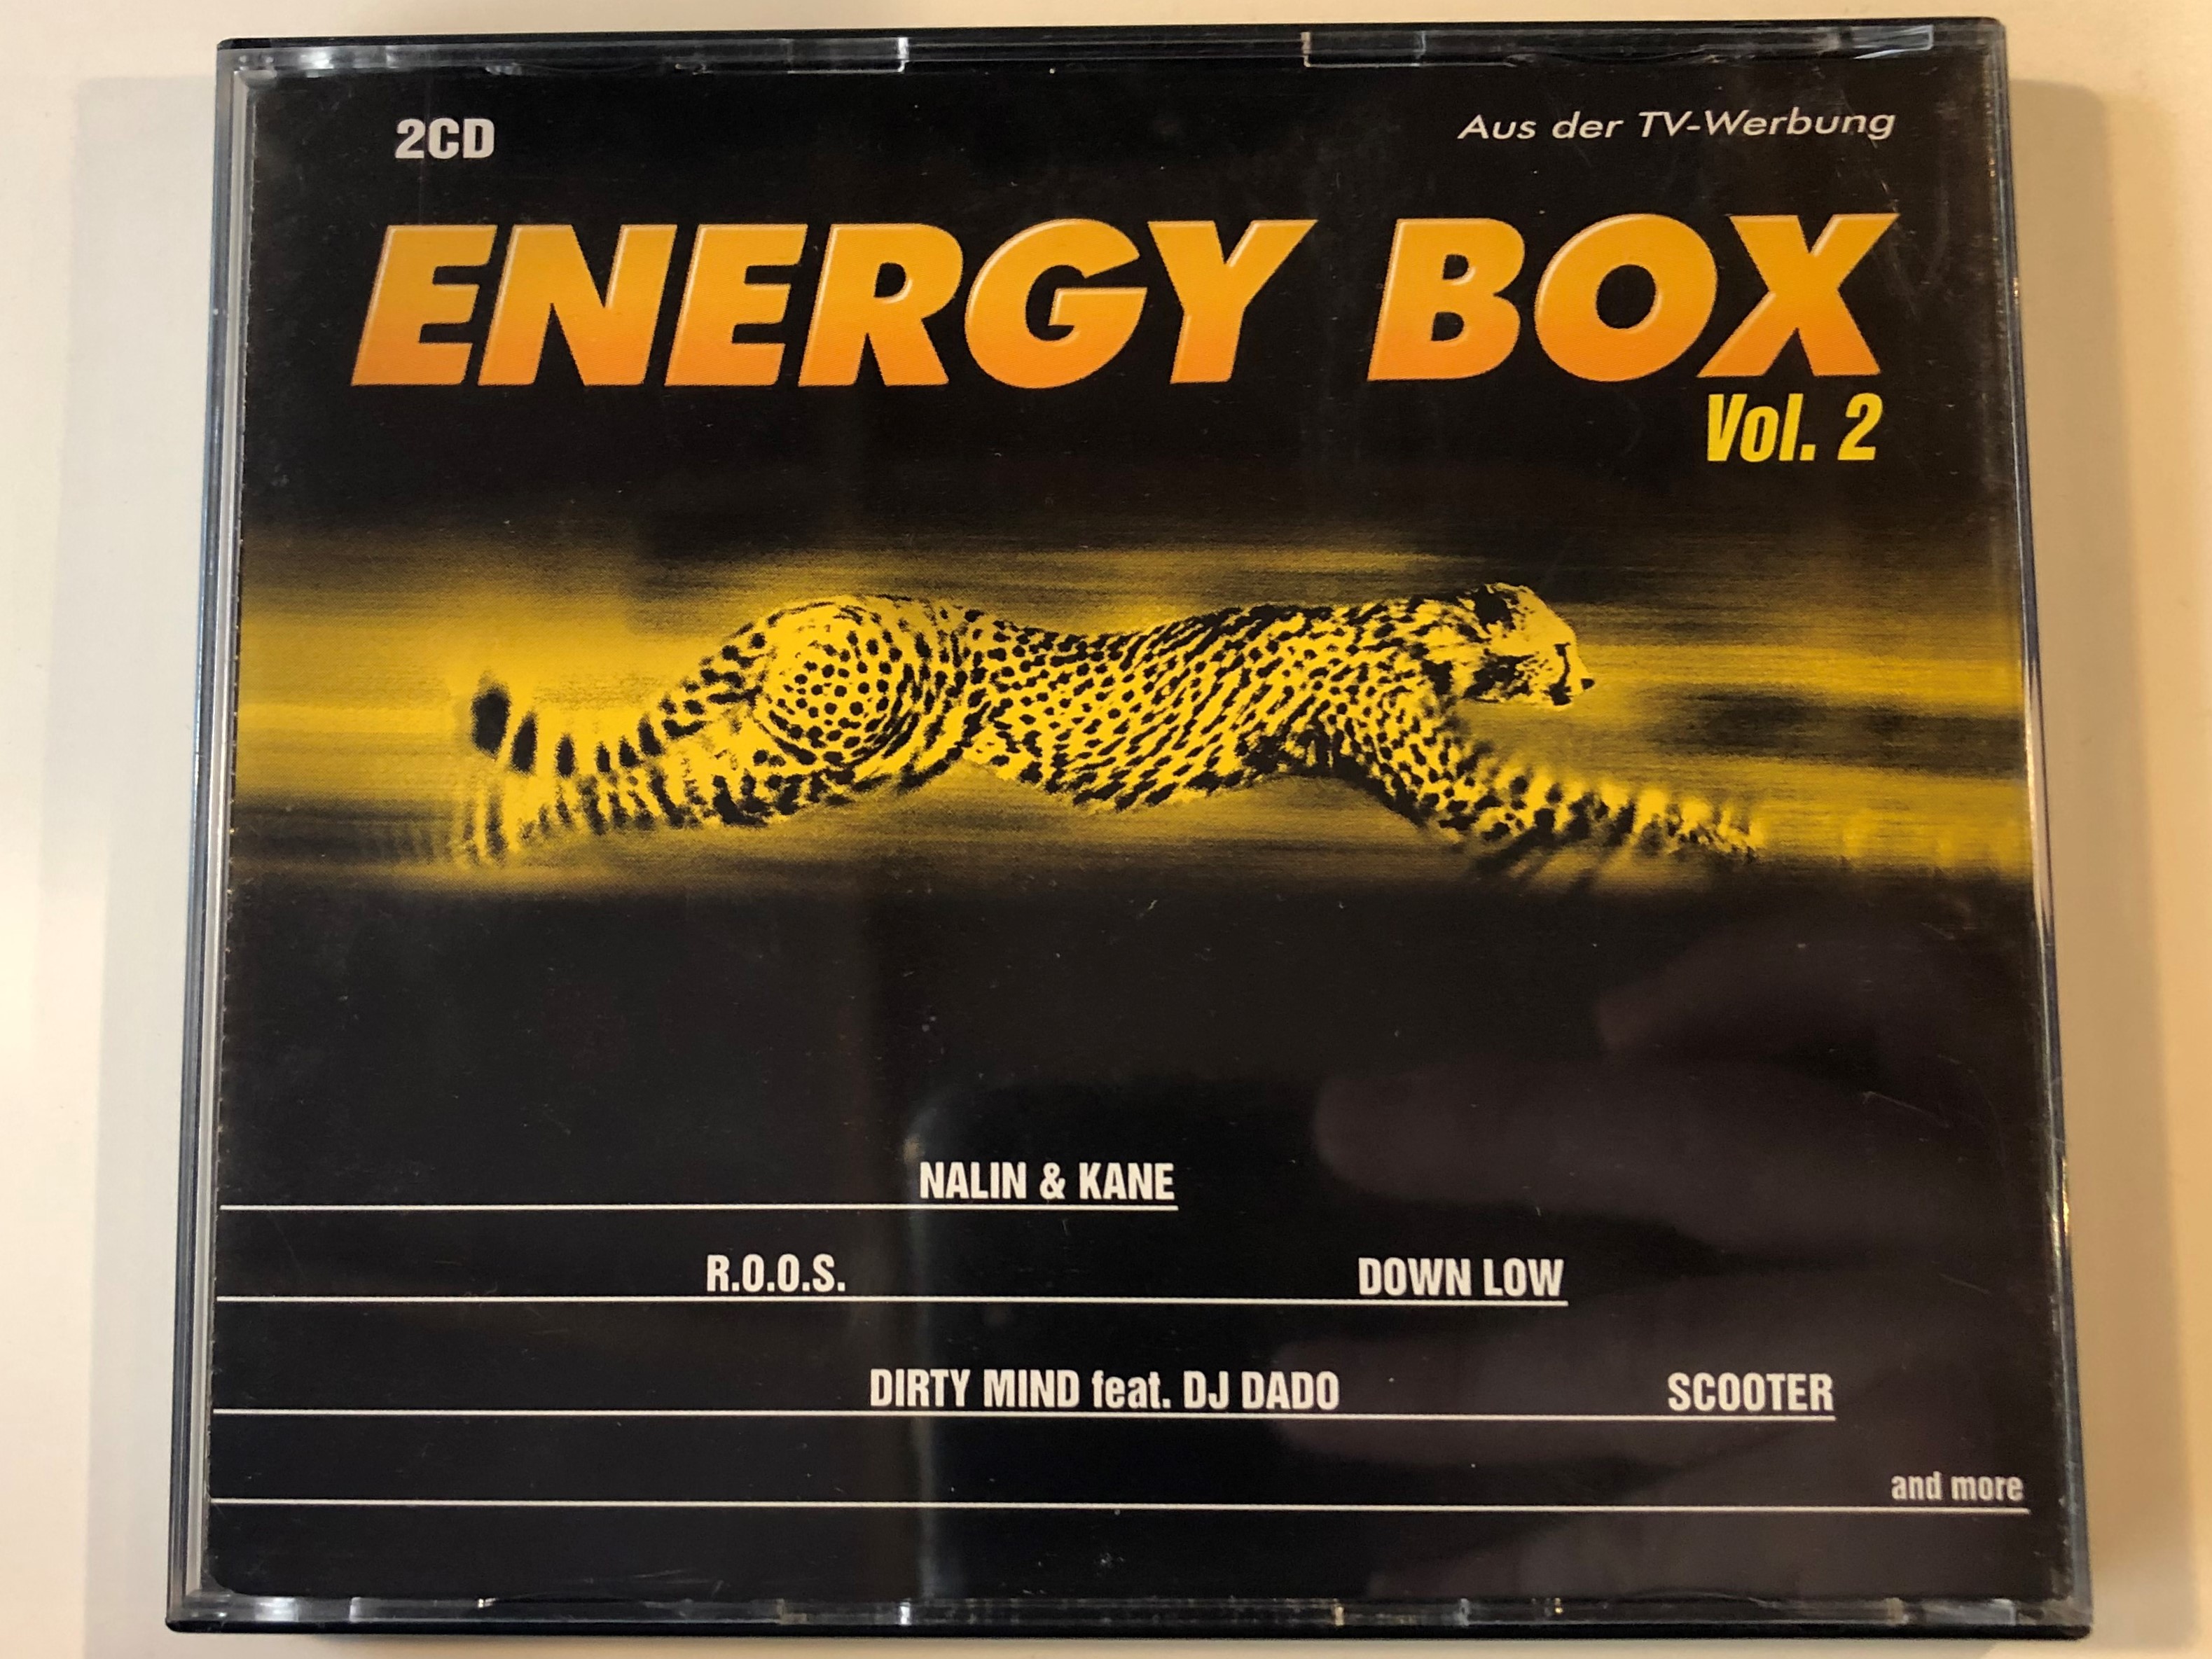 energy-box-vol.-2-nalin-kane-r.o.o.s.-down-low-dirty-mind-feat.-dj-dado-scooter-and-more-zyx-music-2x-audio-cd-1998-zyx-81136-2-1-.jpg